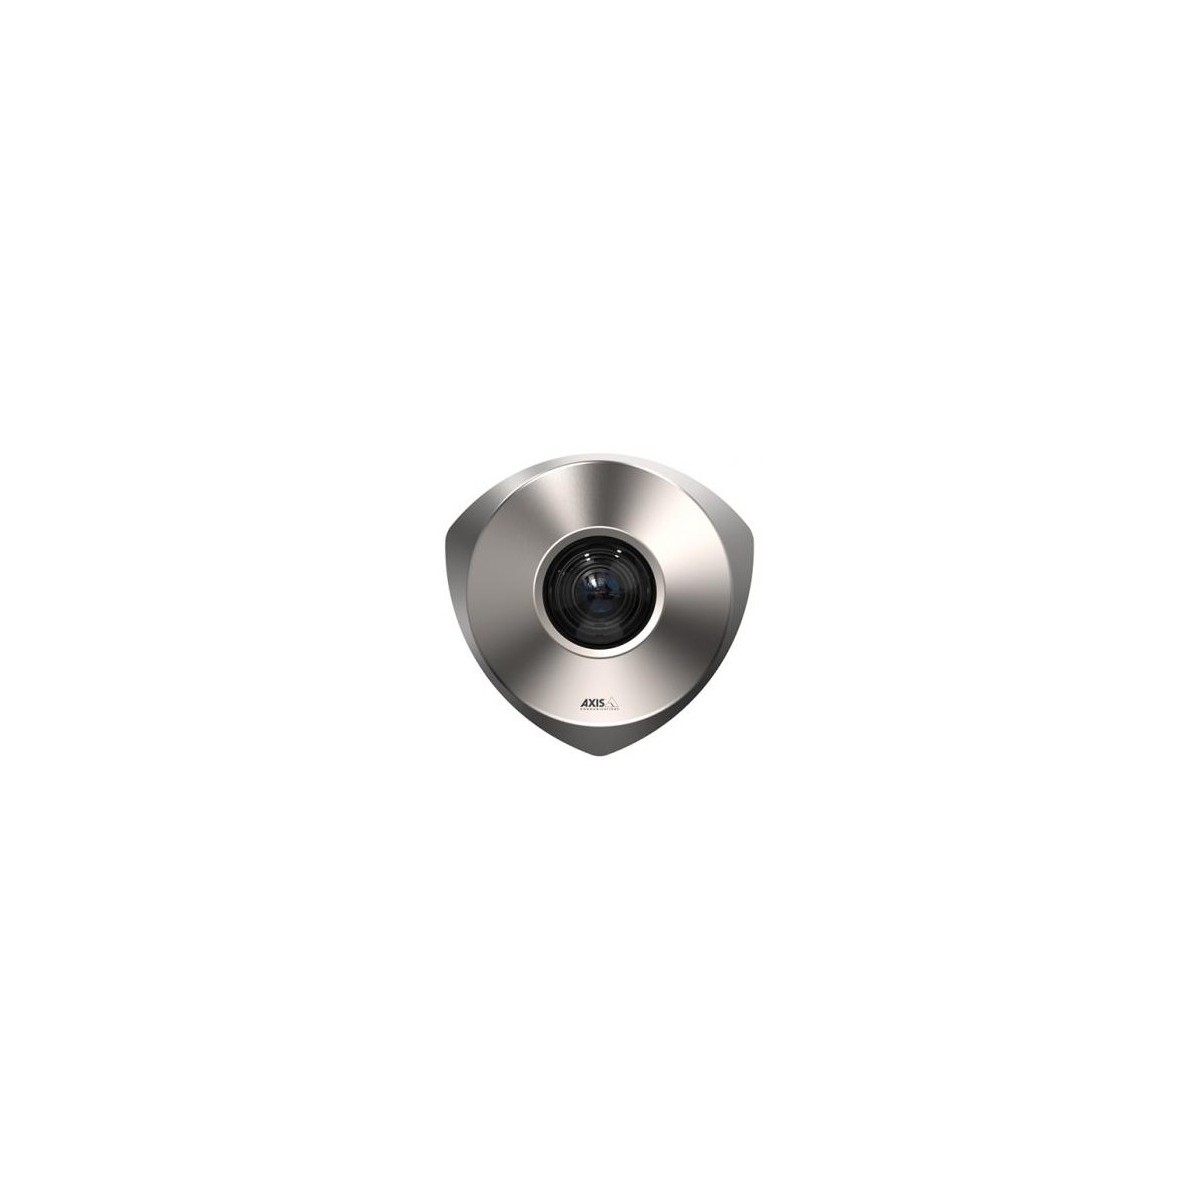 Axis P9106-V B - IP security camera - Indoor - Wired - Digital PTZ - Simplified Chinese - Traditional Chinese - German - English